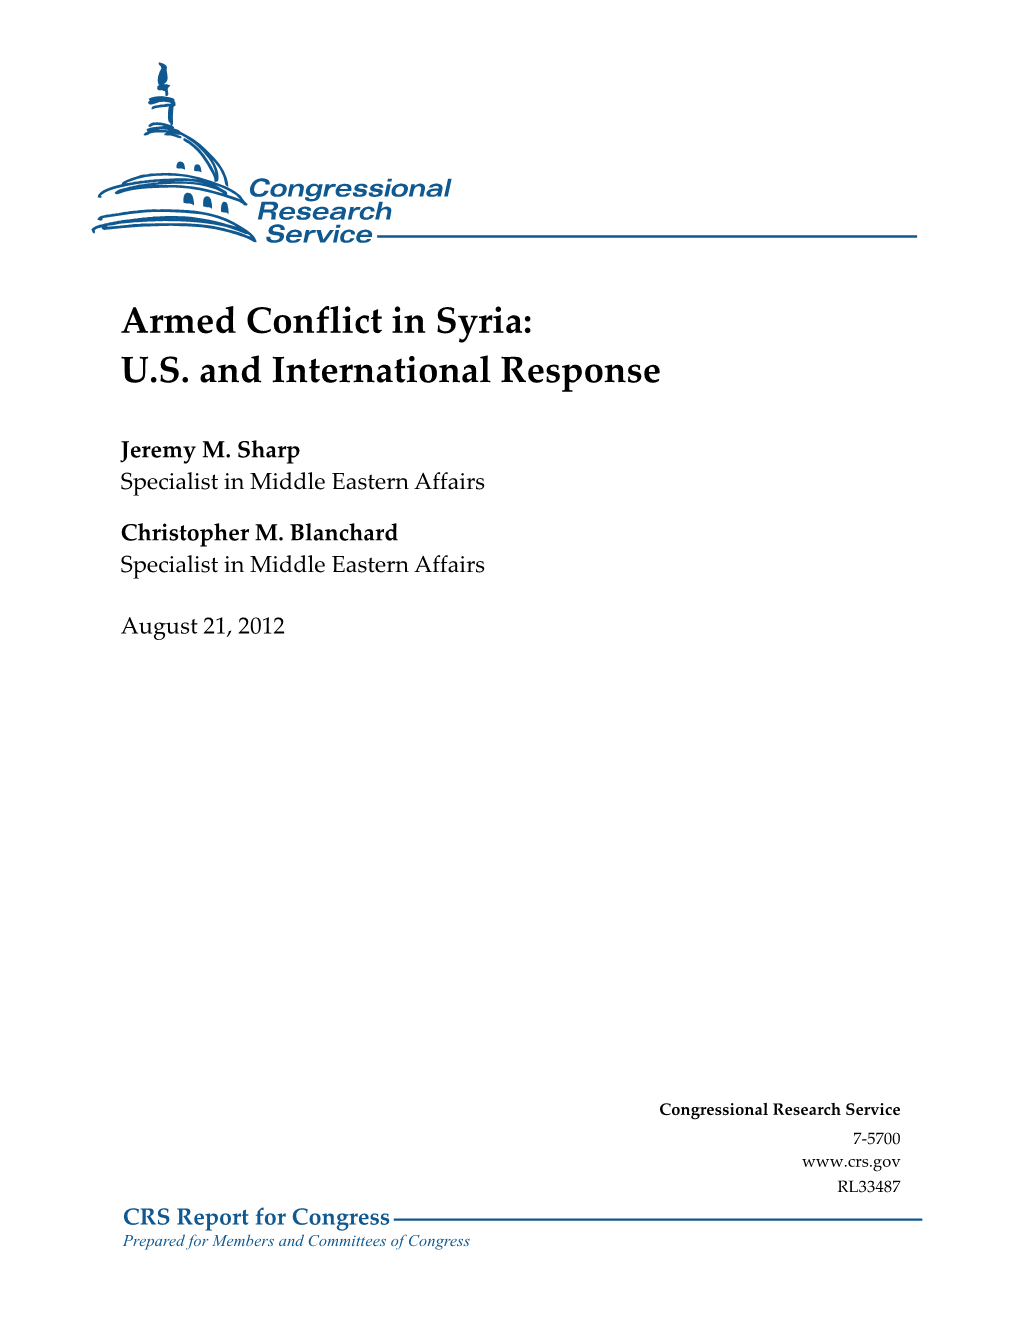 Armed Conflict in Syria: U.S